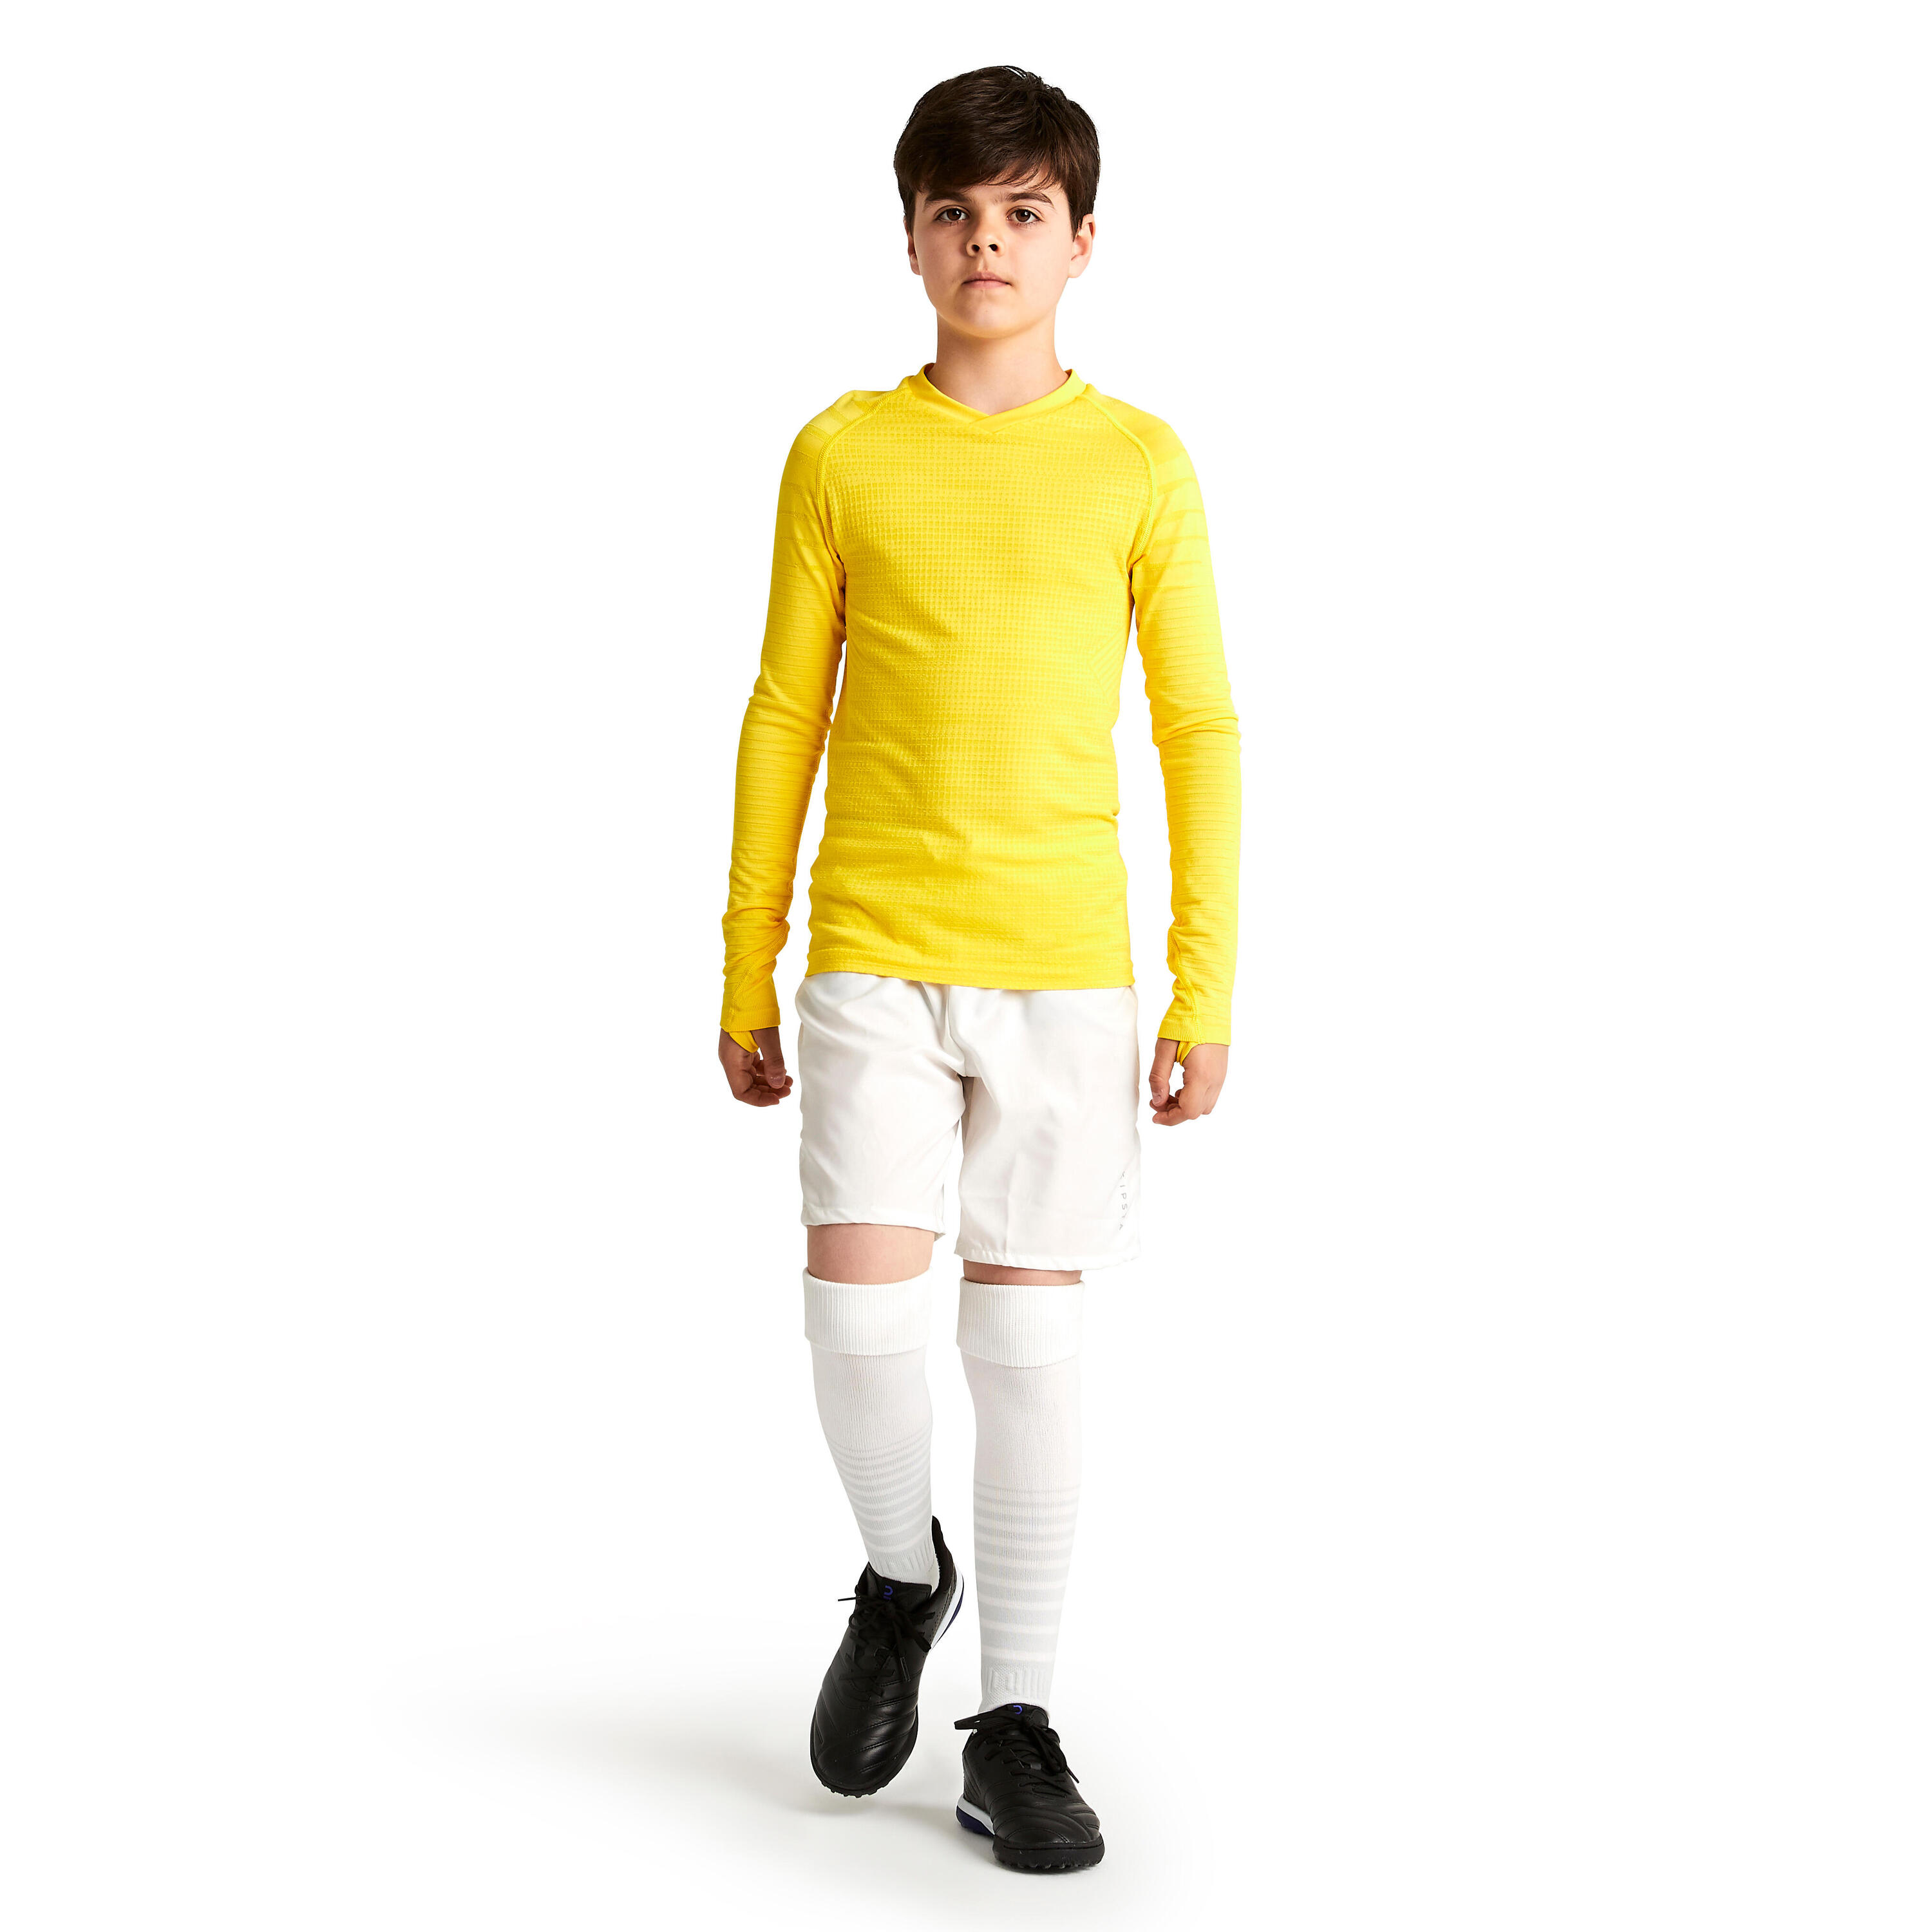 Kids' Long-Sleeved Thermal Base Layer Top Keepdry 500 - Yellow 6/9